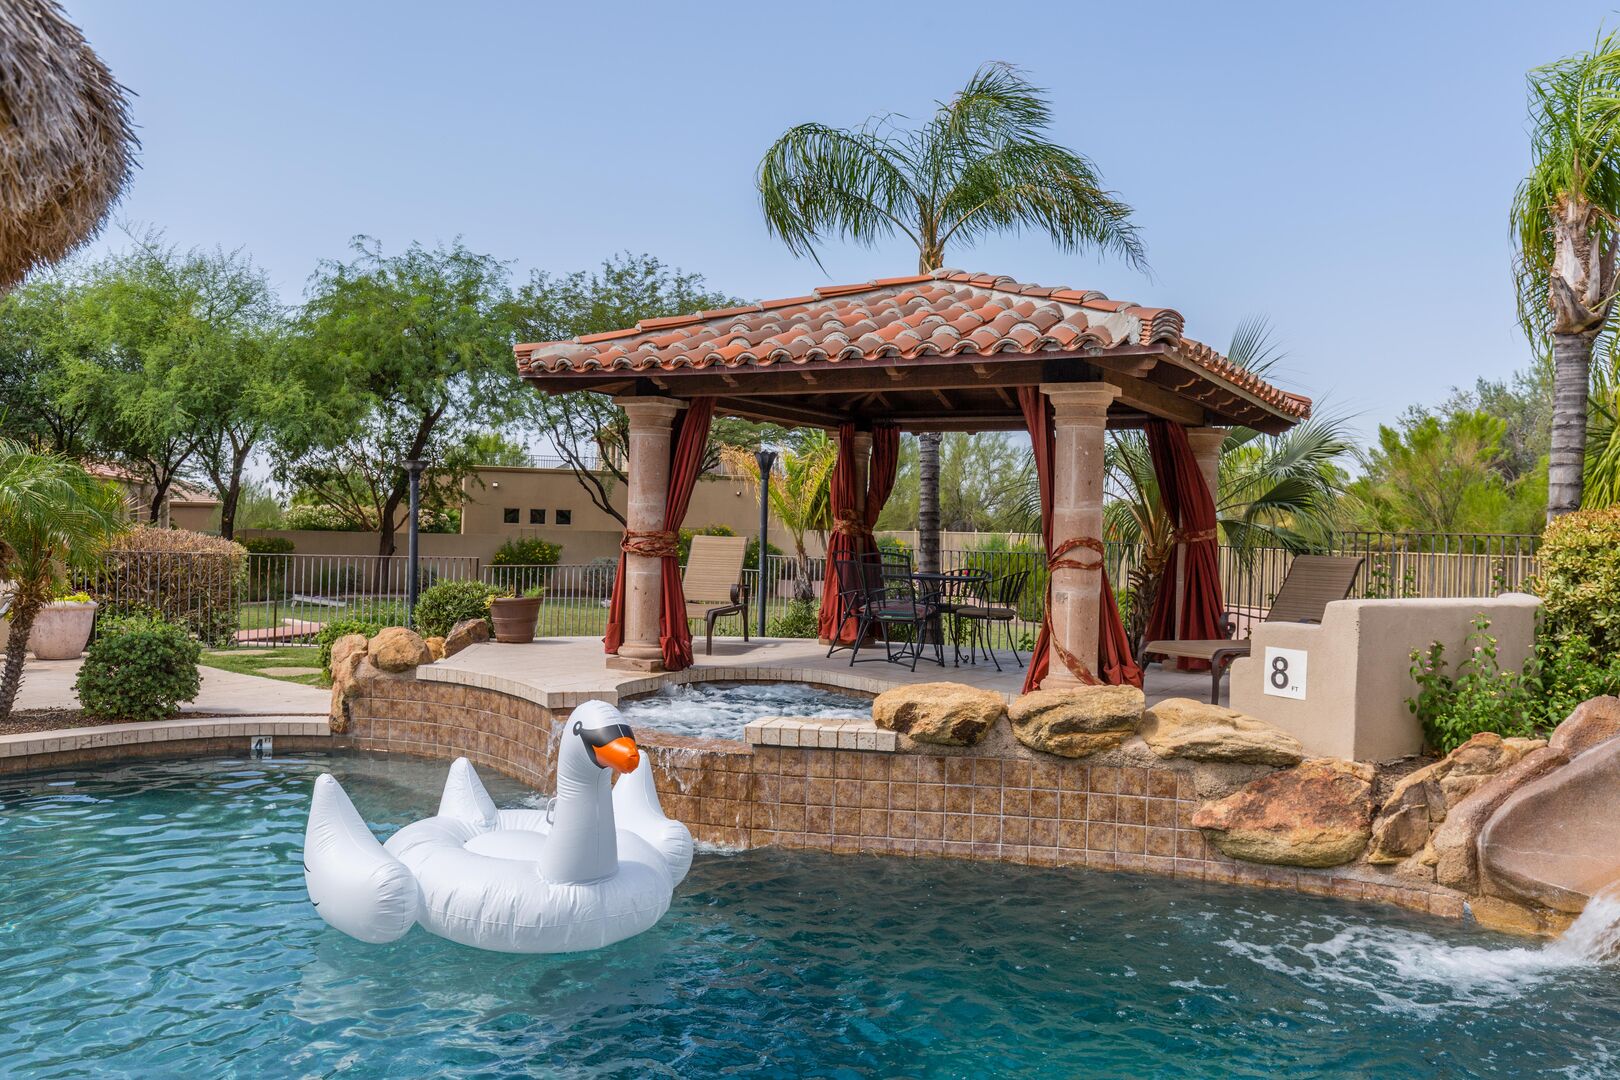 Tropical resort style backyard featuring a heated sparkling blue pool with a waterfall & built-in bar, a hot tub, covered terrace with outdoor dining, fire pit, and a lawn area for yard games surrounded by gorgeous mountain views.